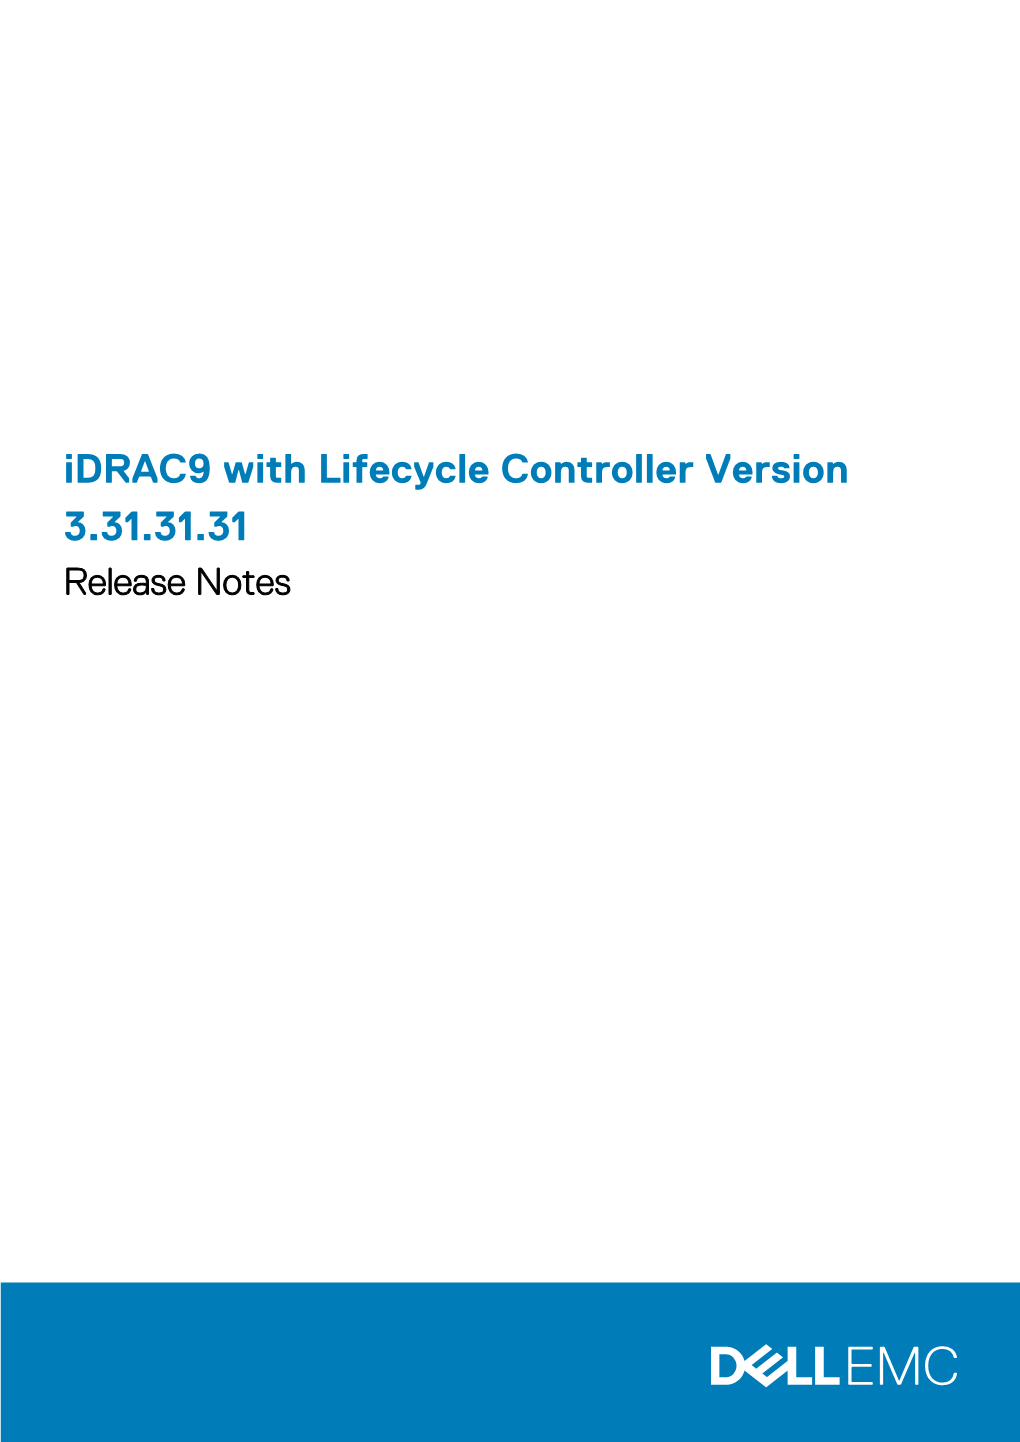 Idrac9 with Lifecycle Controller Version 3.31.31.31 Release Notes Notes, Cautions, and Warnings